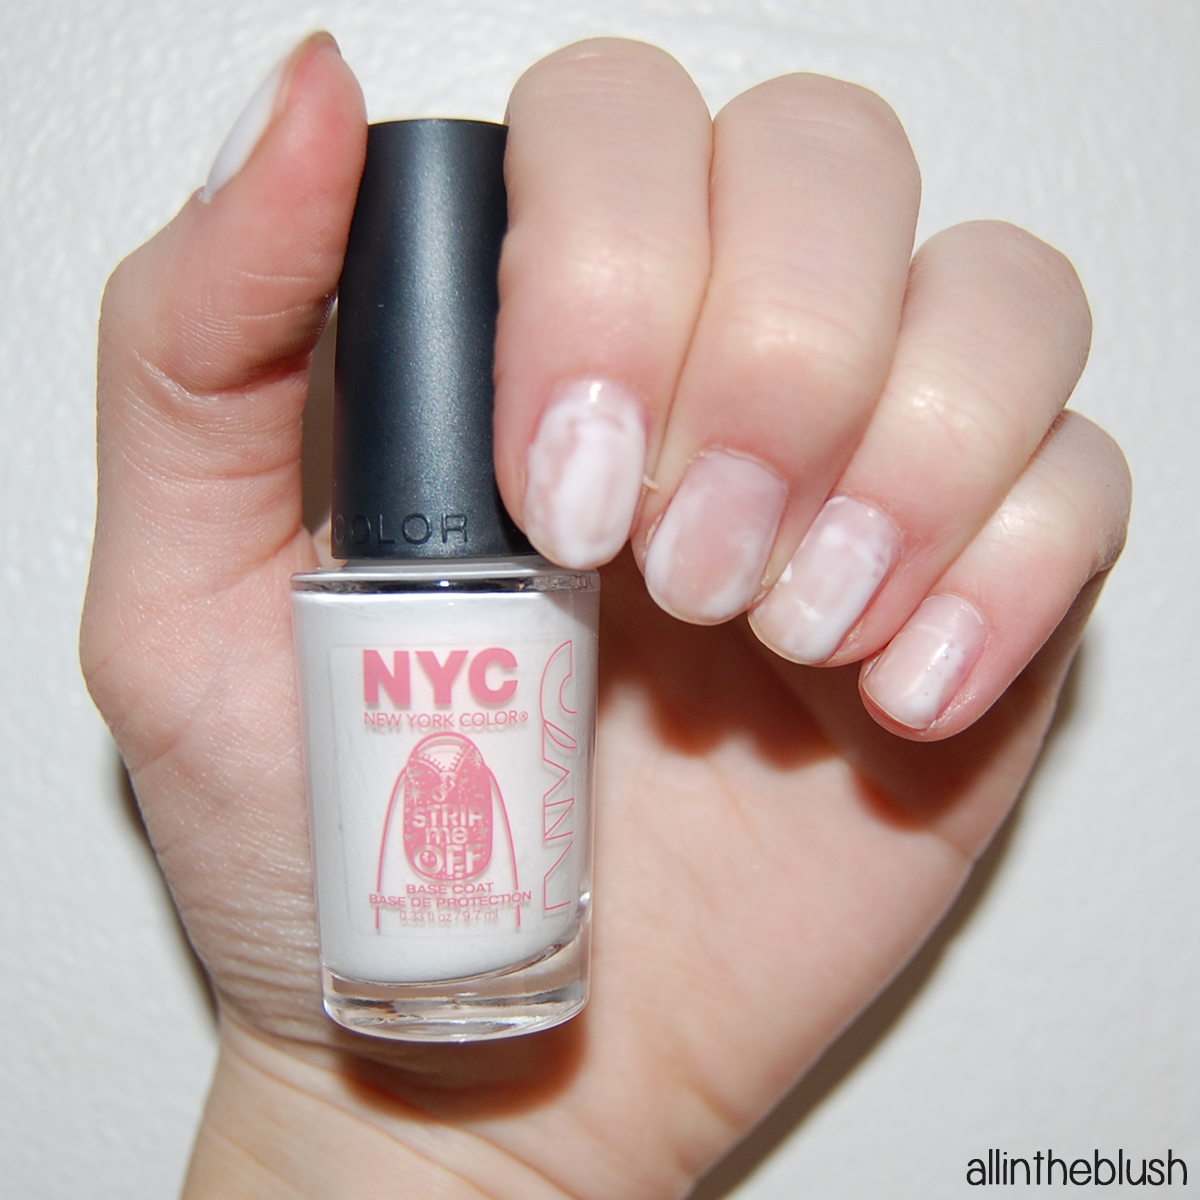 Review: NYC New York Color Strip Me Off Base Coat - All In The Blush